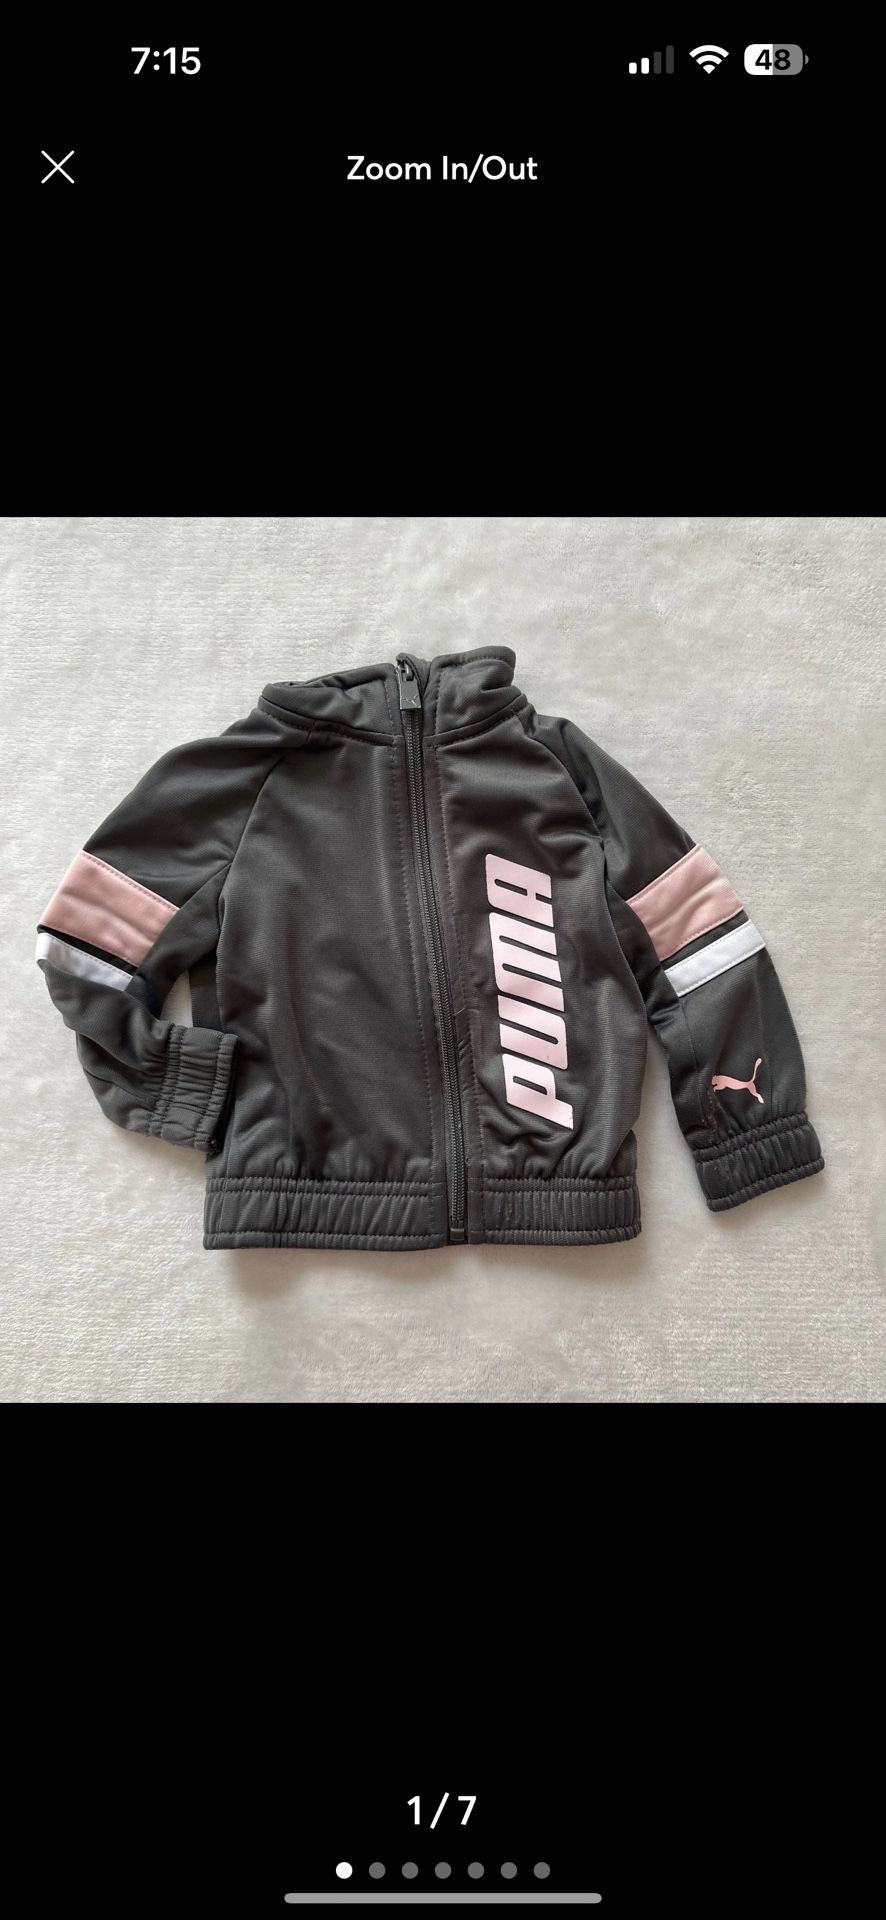 BABY PUMA JACKET GRAY AND PINK 6-9 MONTHS